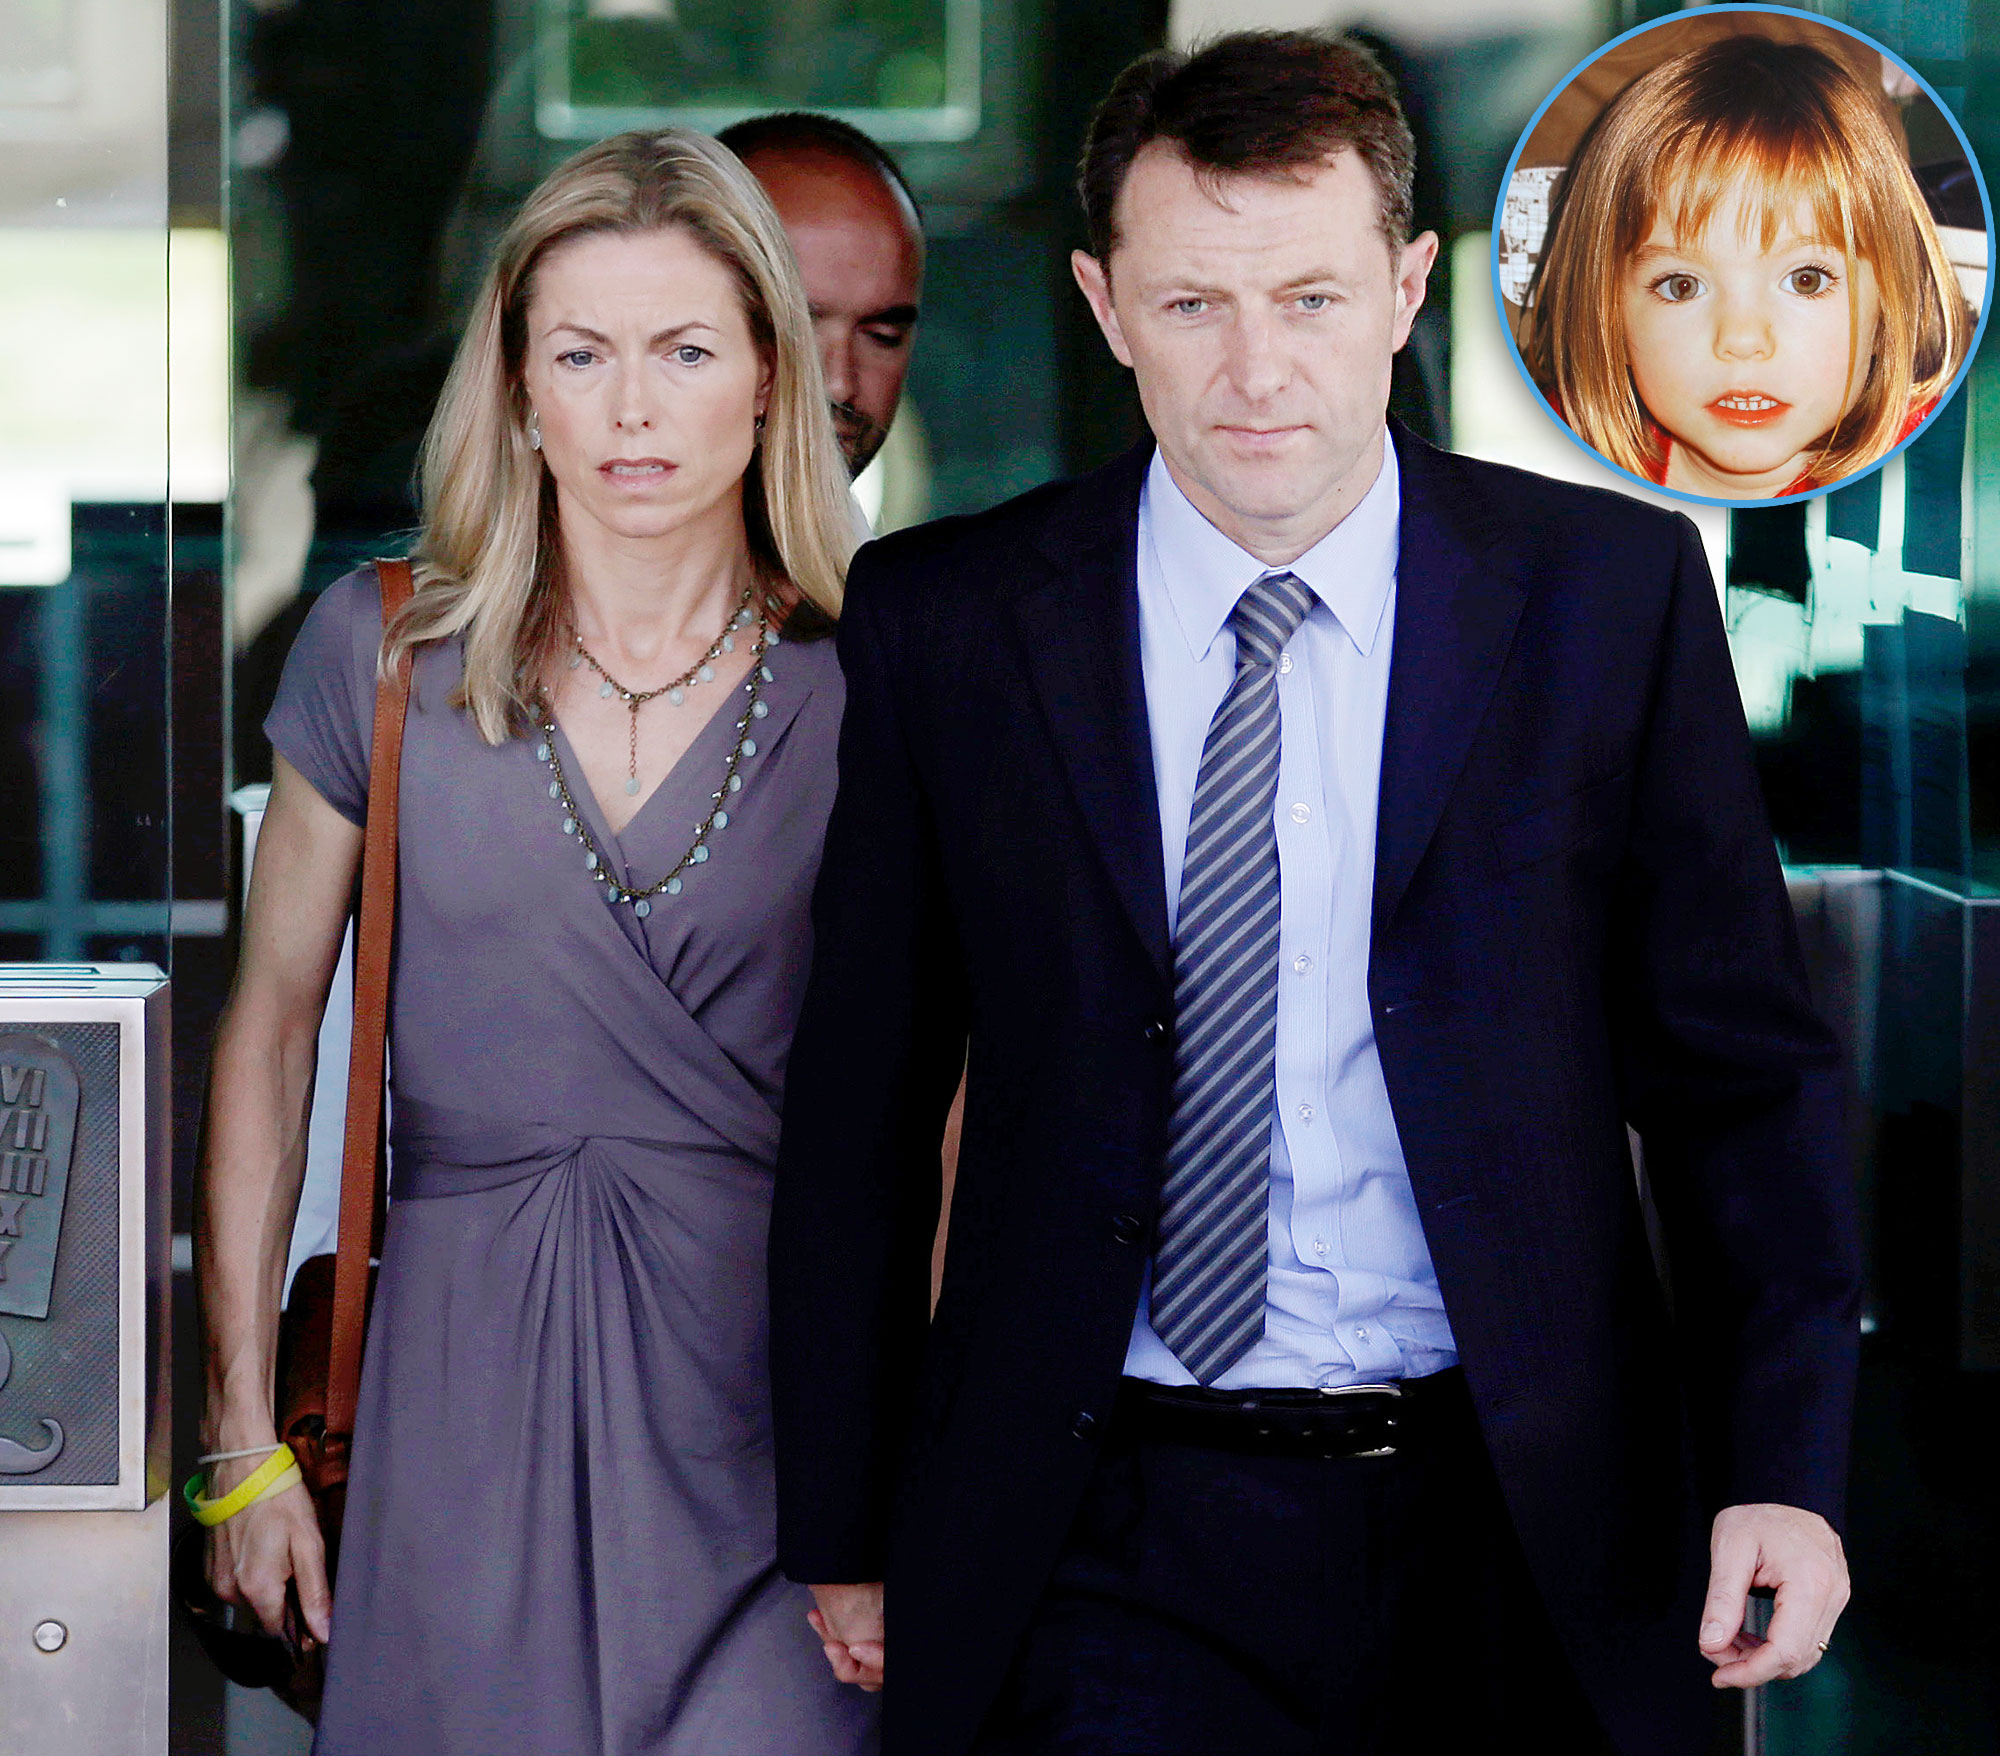 Madeleine McCanns Family Now What Happened to Parents and Siblings image